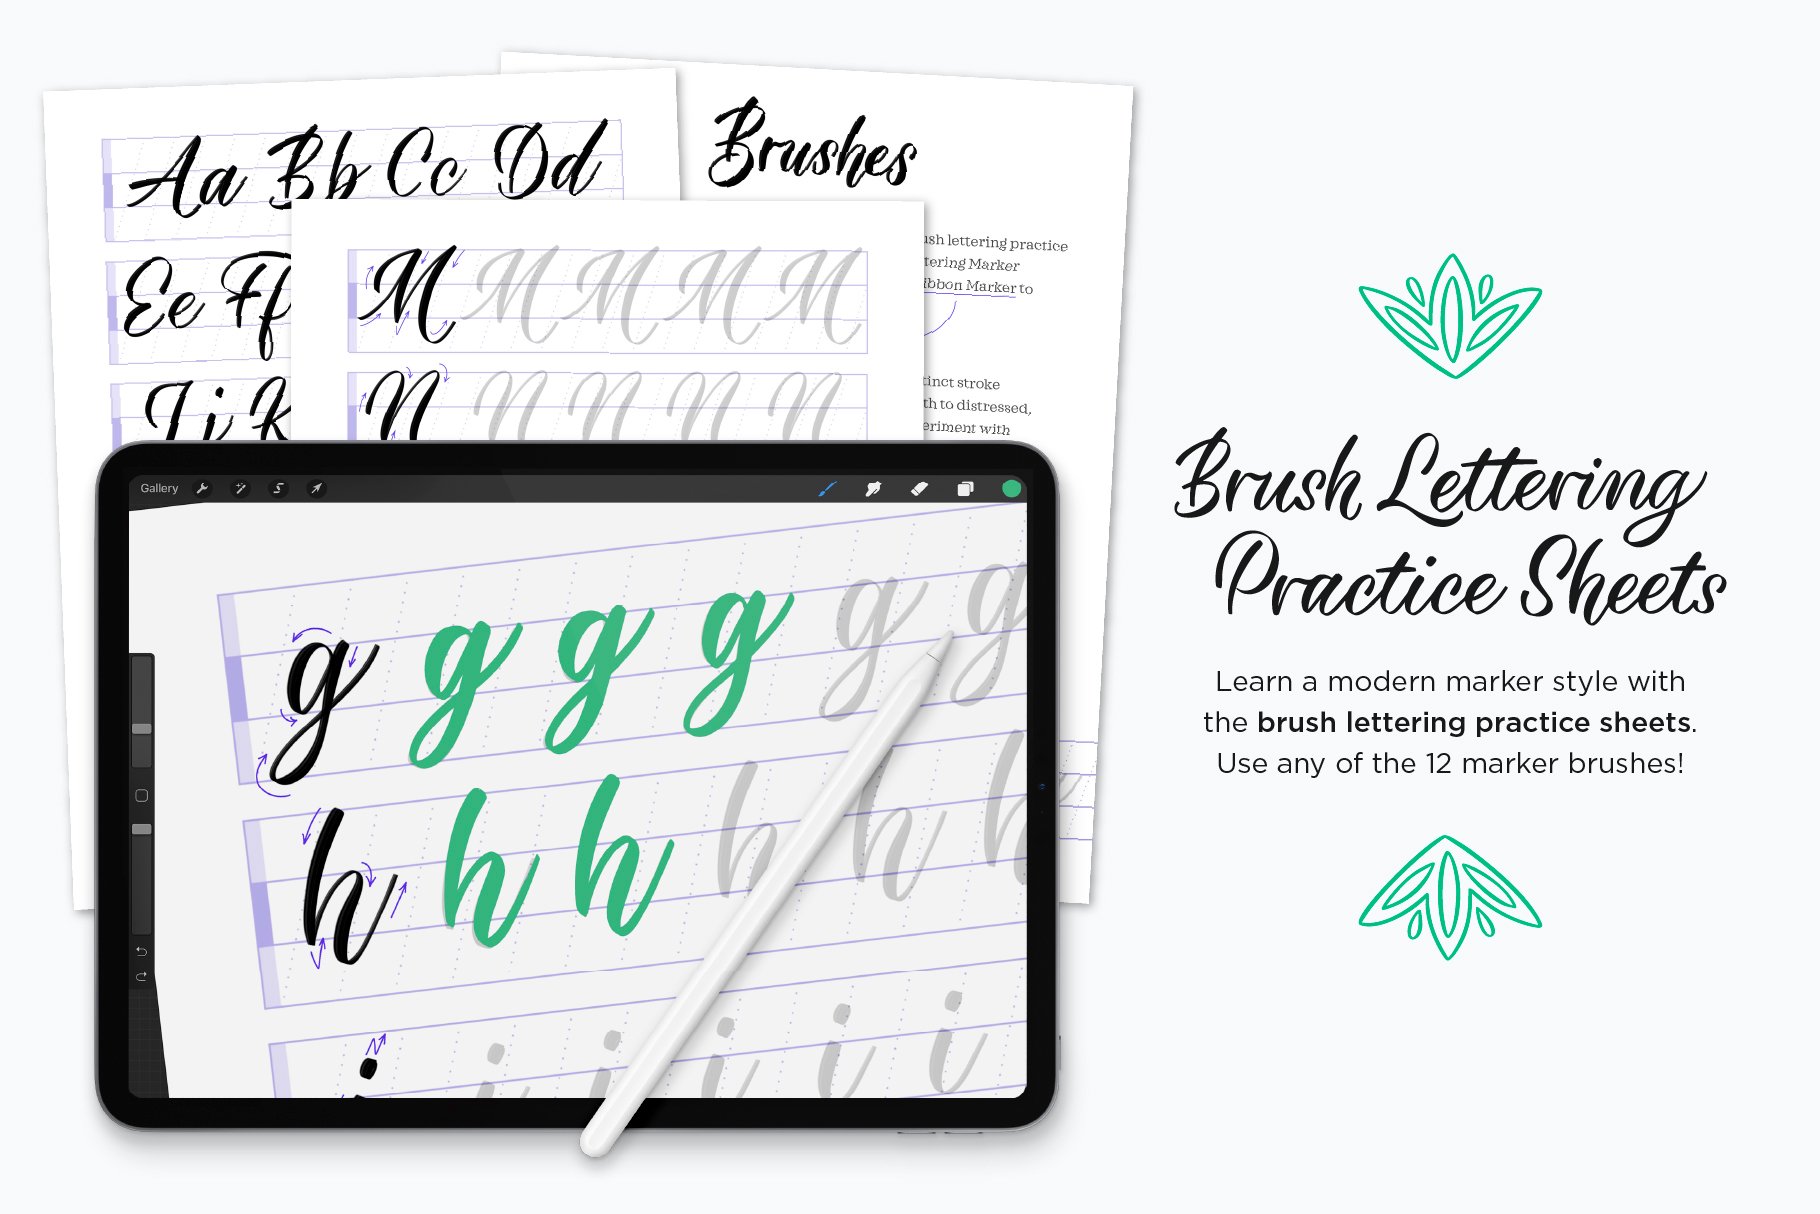 30 Calligraphy & Lettering Guides – Print & Procreate